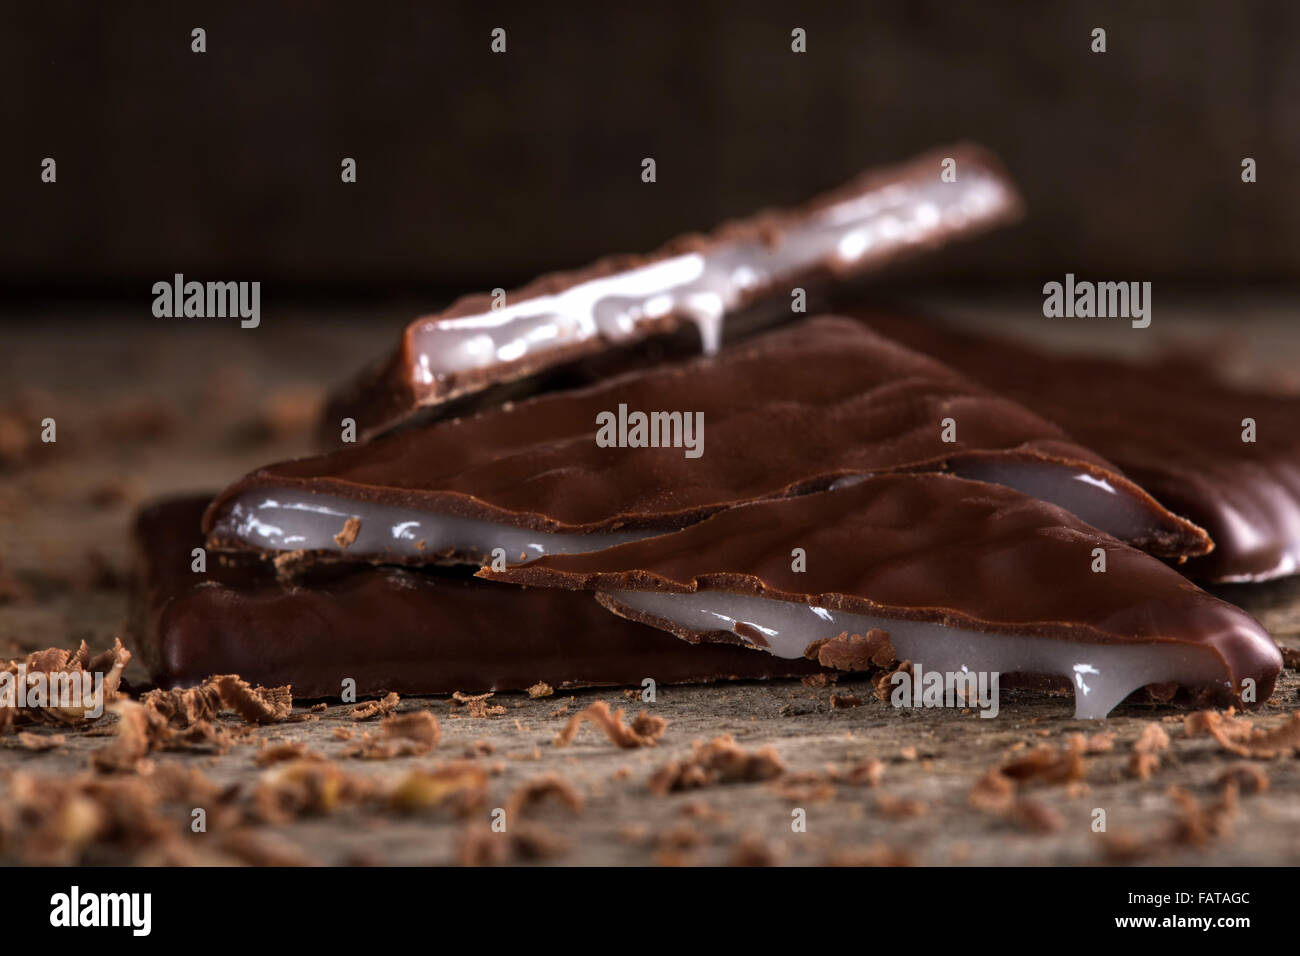 Close-up of some After Dinner mints chocolate over rustic background Stock Photo